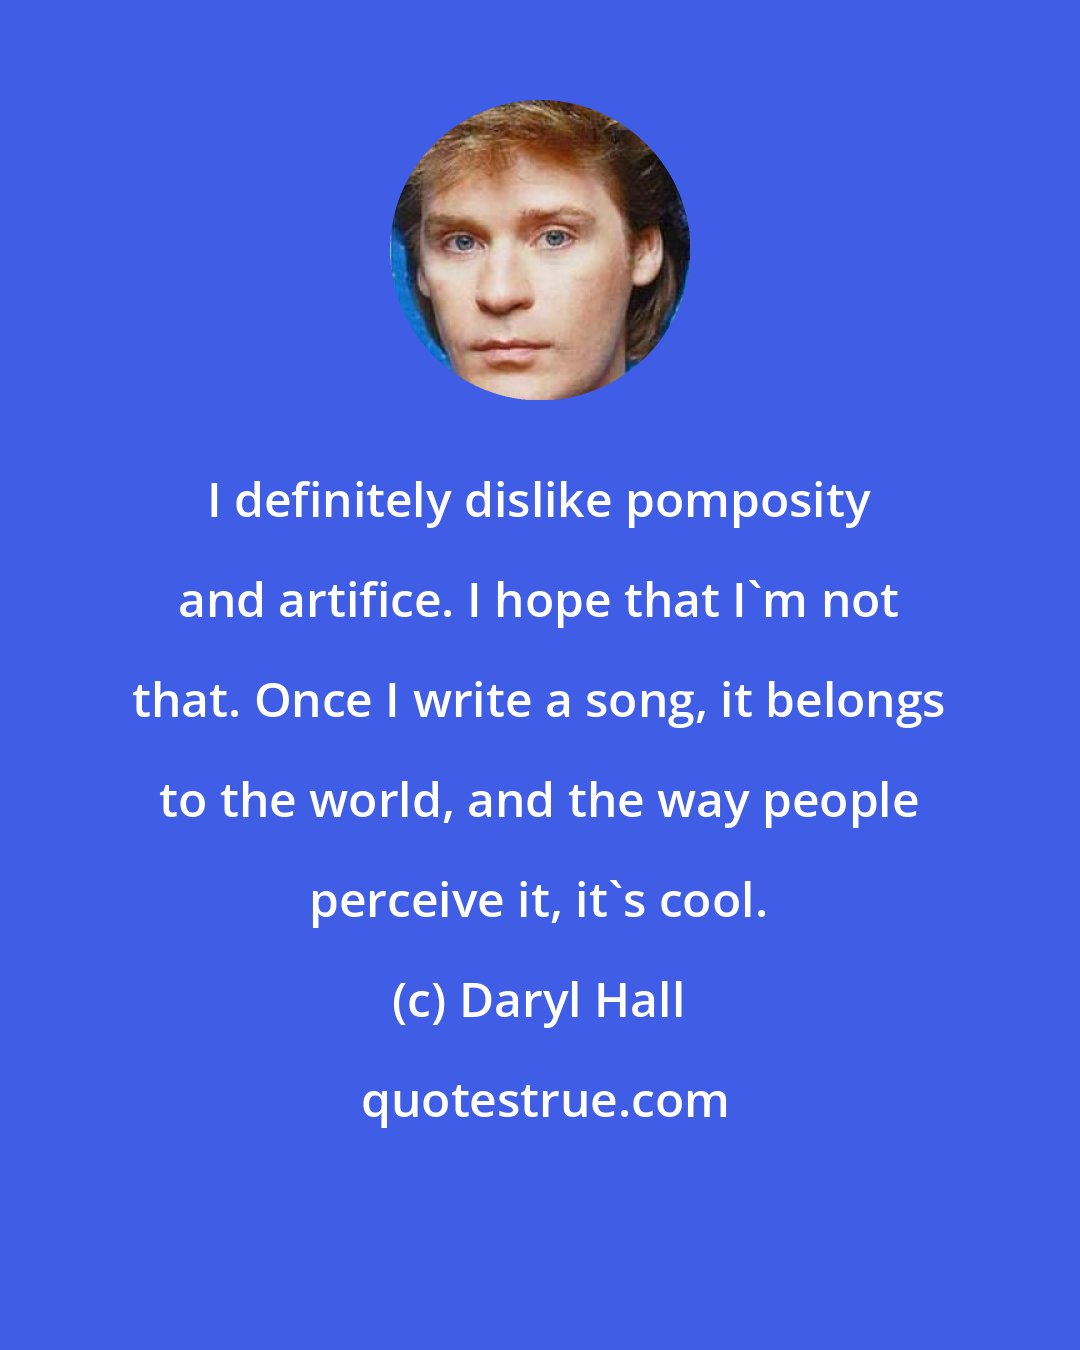 Daryl Hall: I definitely dislike pomposity and artifice. I hope that I'm not that. Once I write a song, it belongs to the world, and the way people perceive it, it's cool.